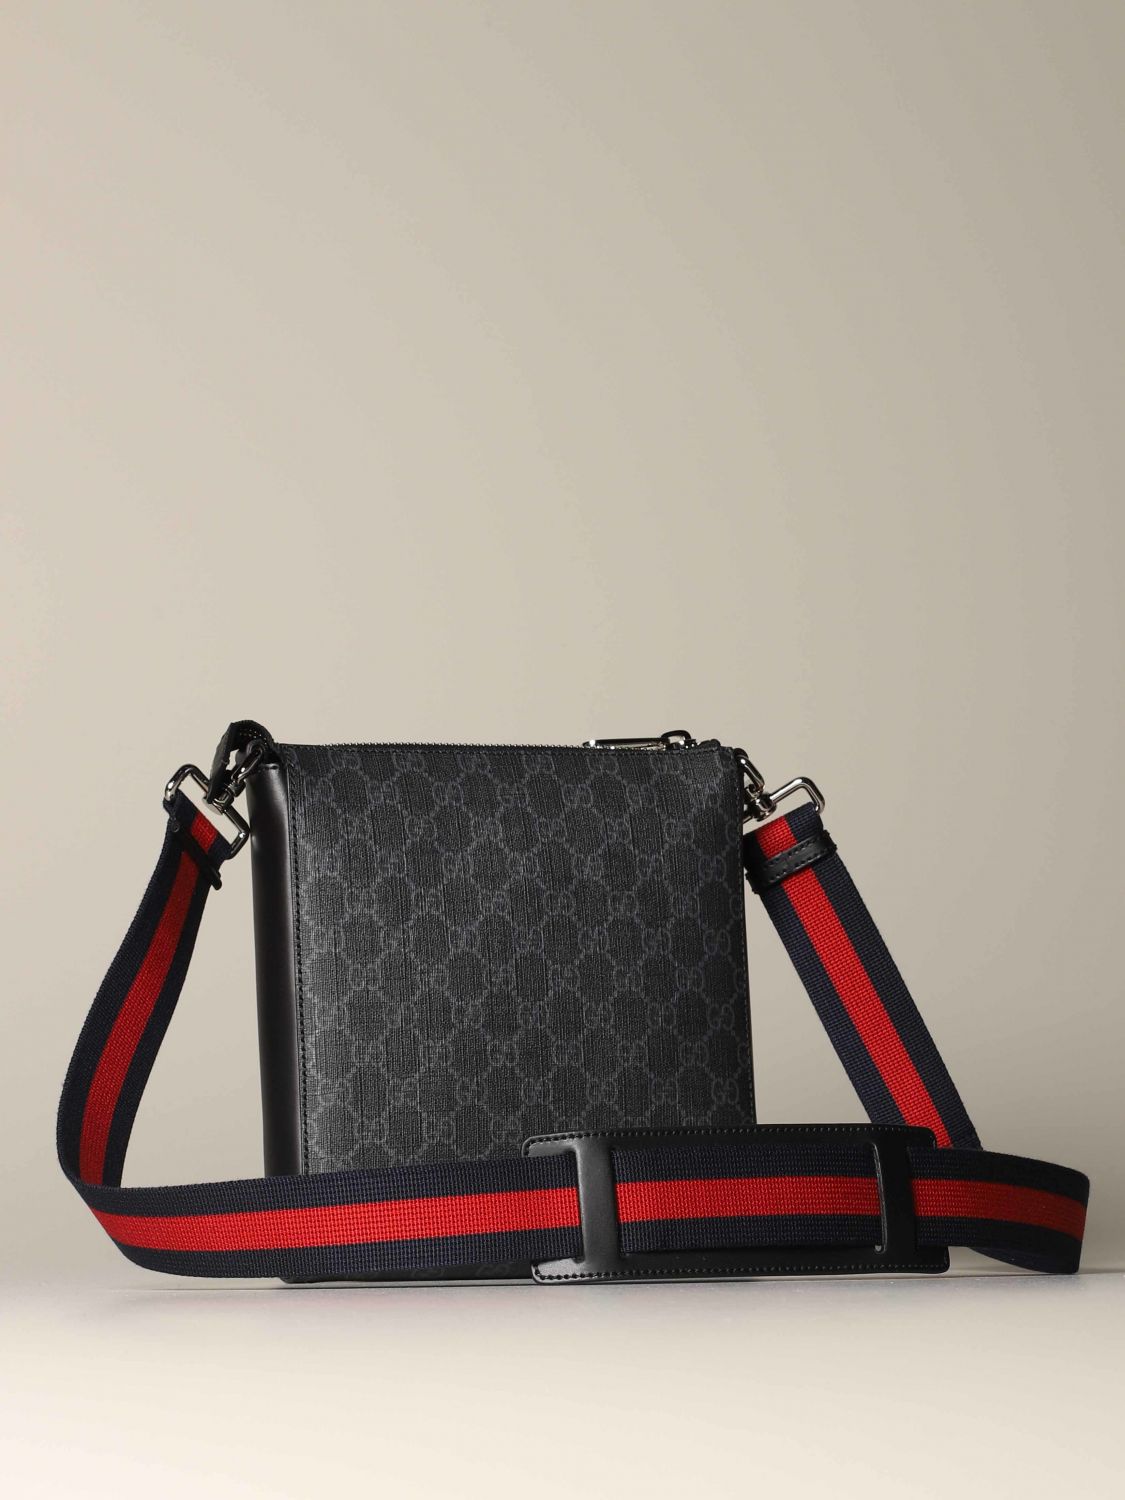 gucci bag with fabric strap